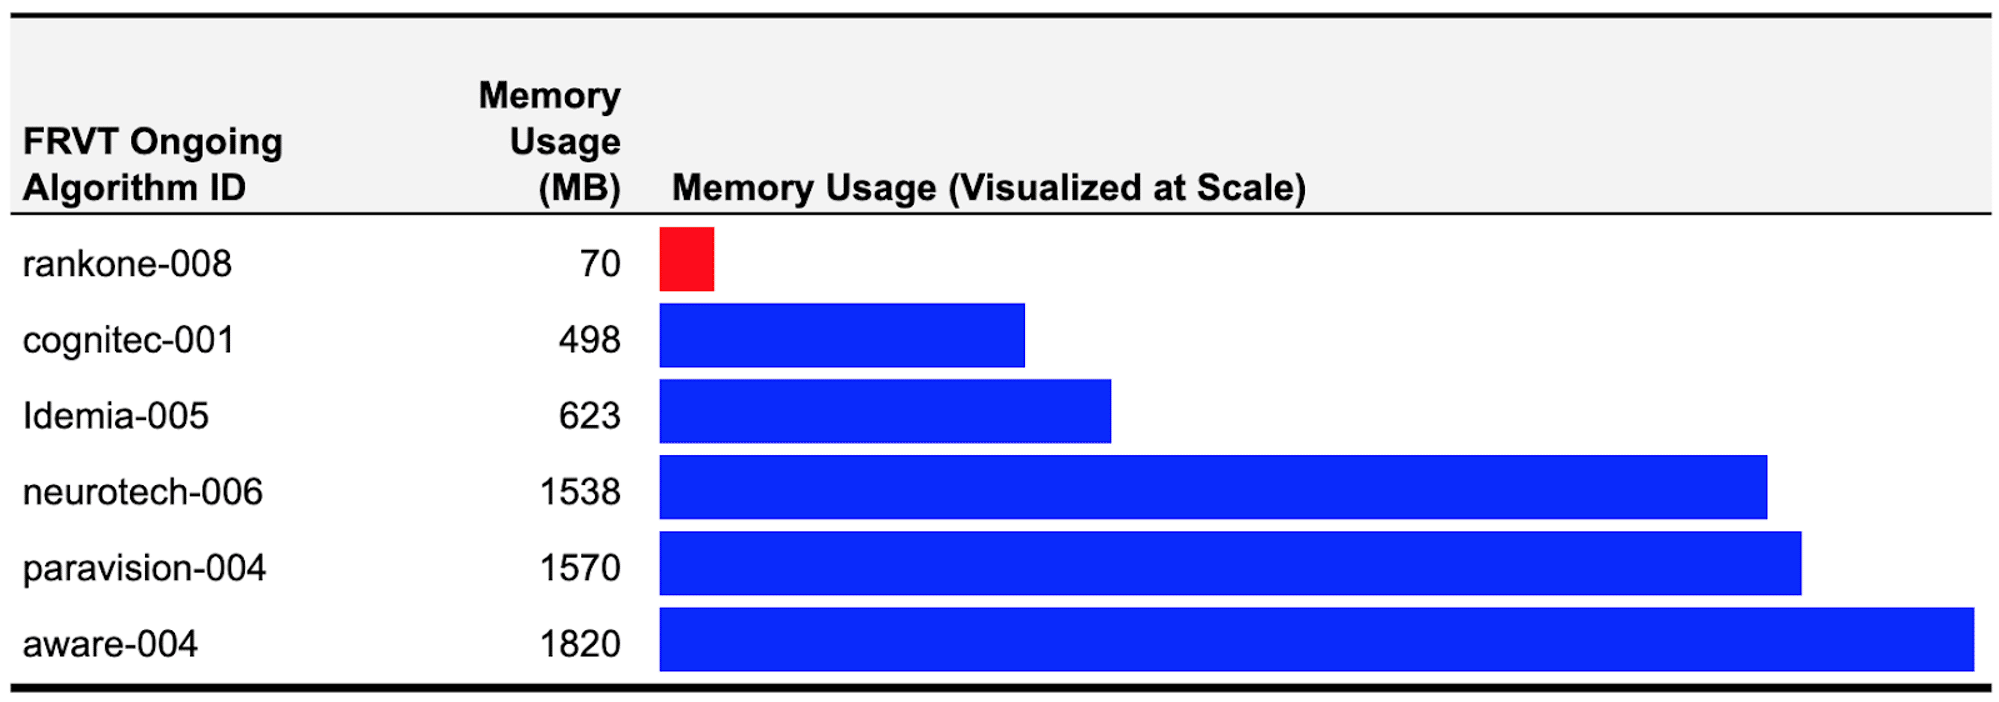 Memory usage per face recognition vendor. Rank One, 70 MB. Cognitec 498 MB. Idemia, 623 MB. Neurotechnology, 1538 MB. Paravision, 1570 MB. Aware, 1820 MB.